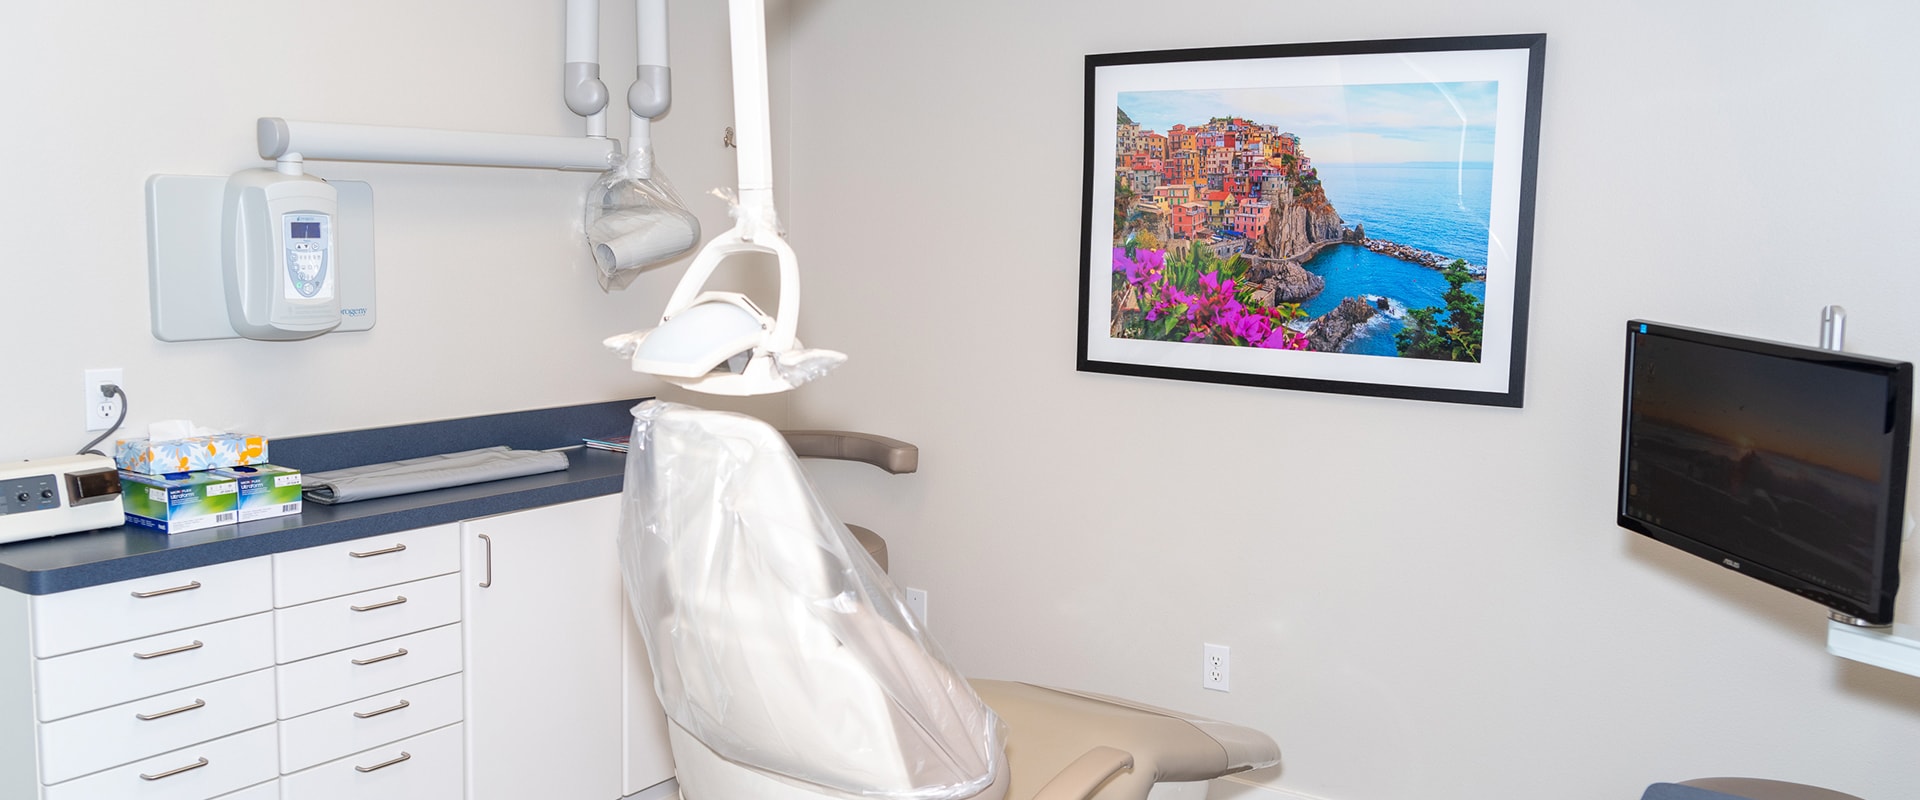 Inside one of the treatment rooms of Smokey Point Family Dentistry with a monitor and dental chair